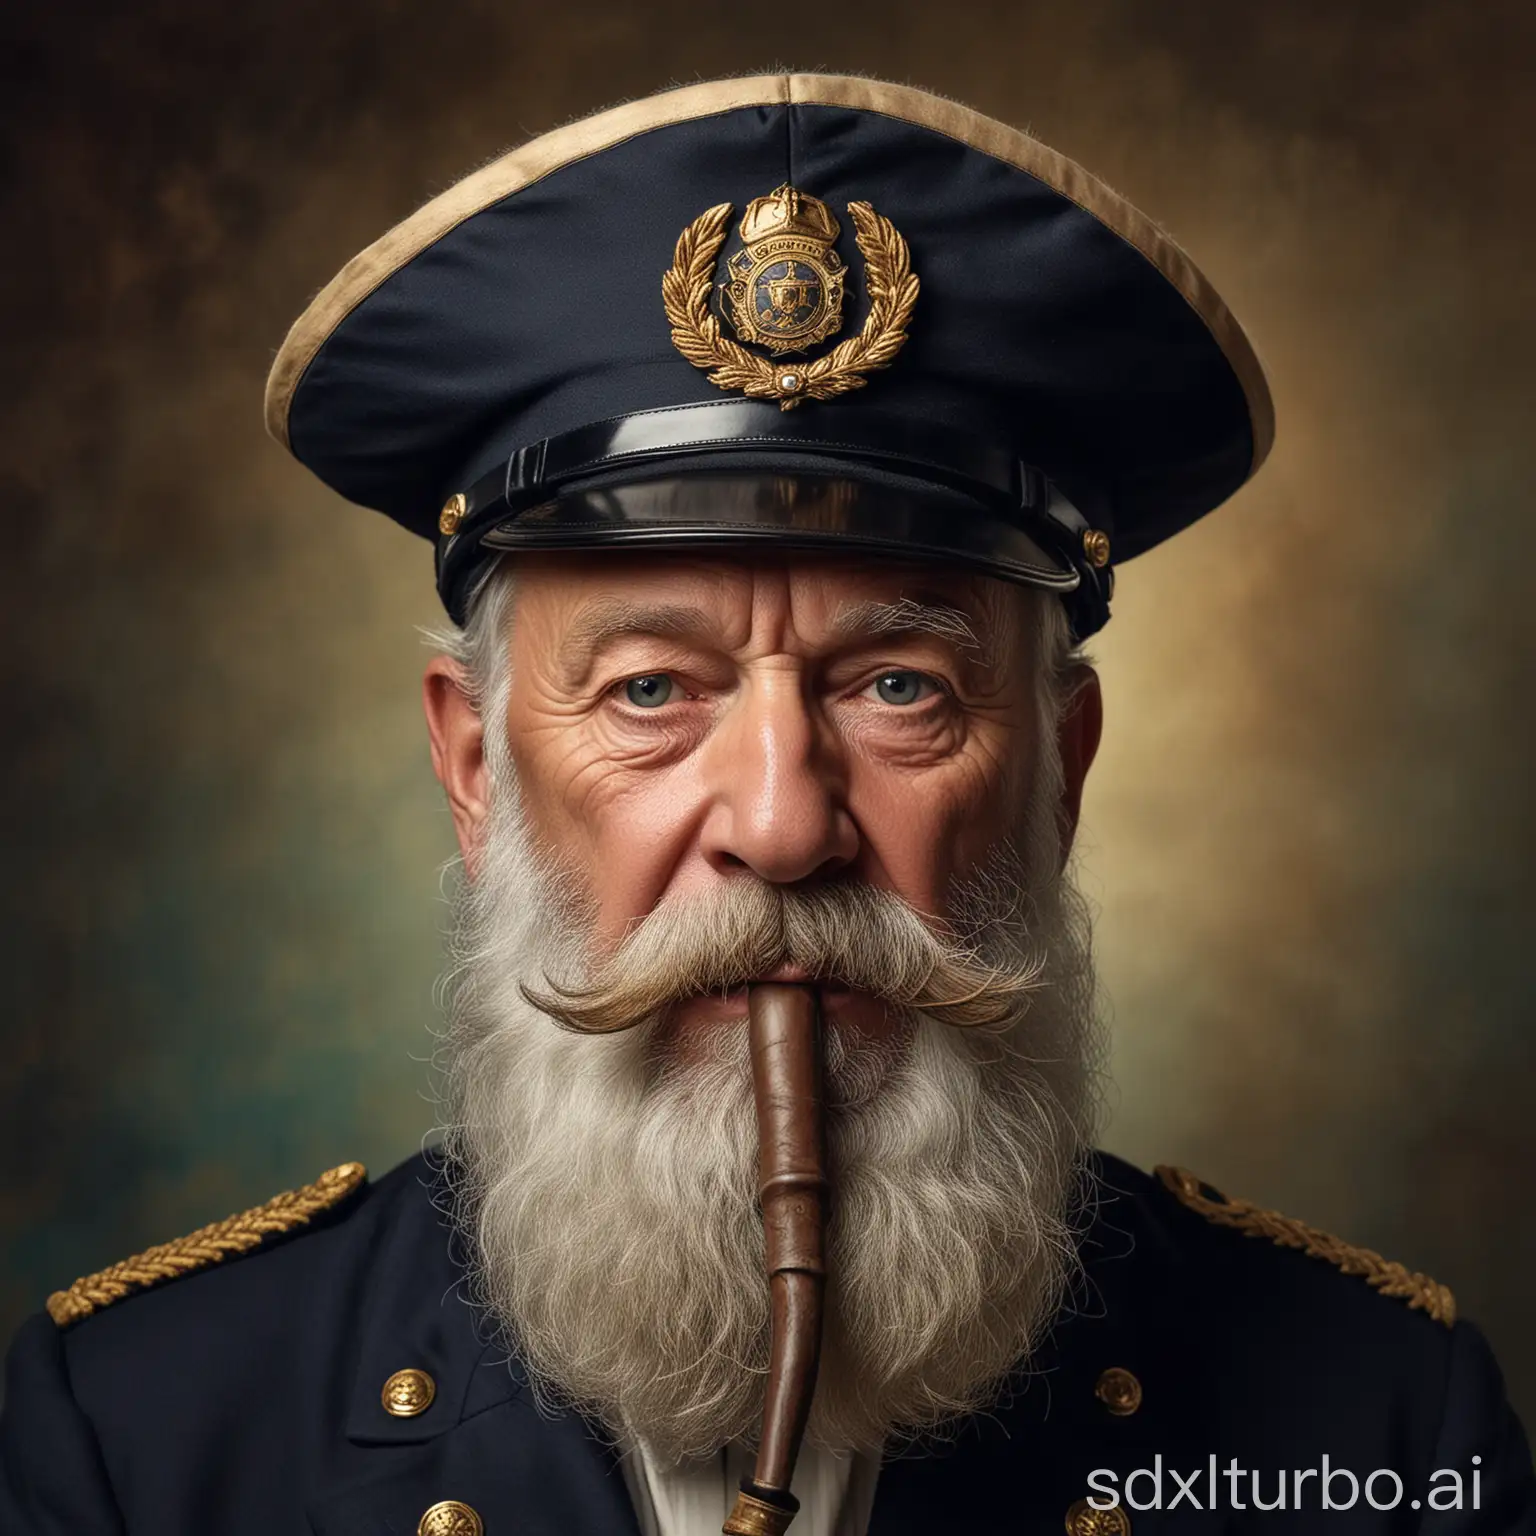 Photo super sharp. Portrait of an old captain with a pipe in his mouth and a captain's hat. He's supposed to have a full beard, his face is wrinkled.